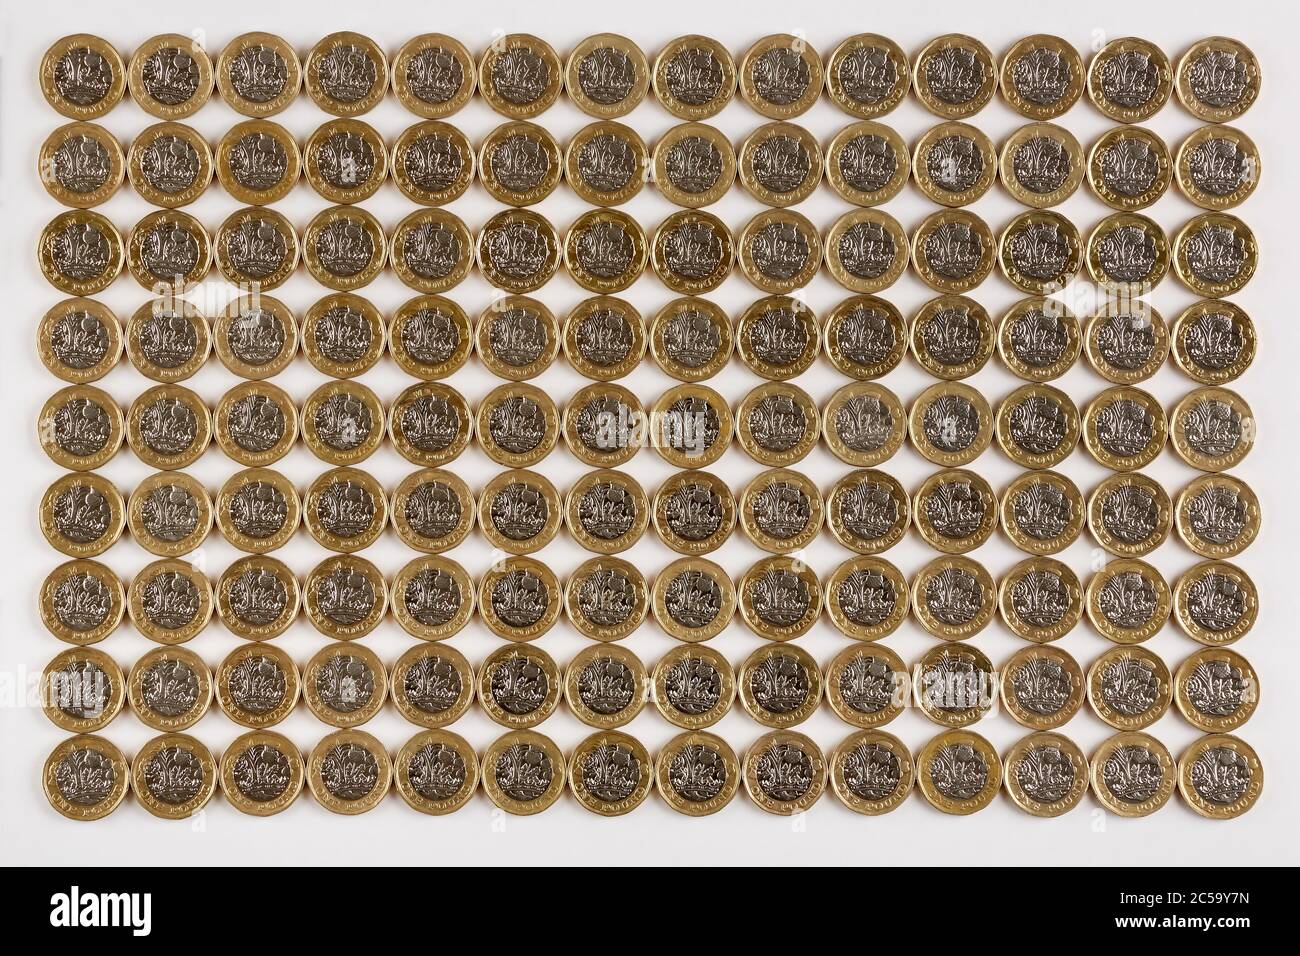 Photograph of multiple rows of new UK £1 pound coins (new £1 coins in circulation after October 2017) Stock Photo